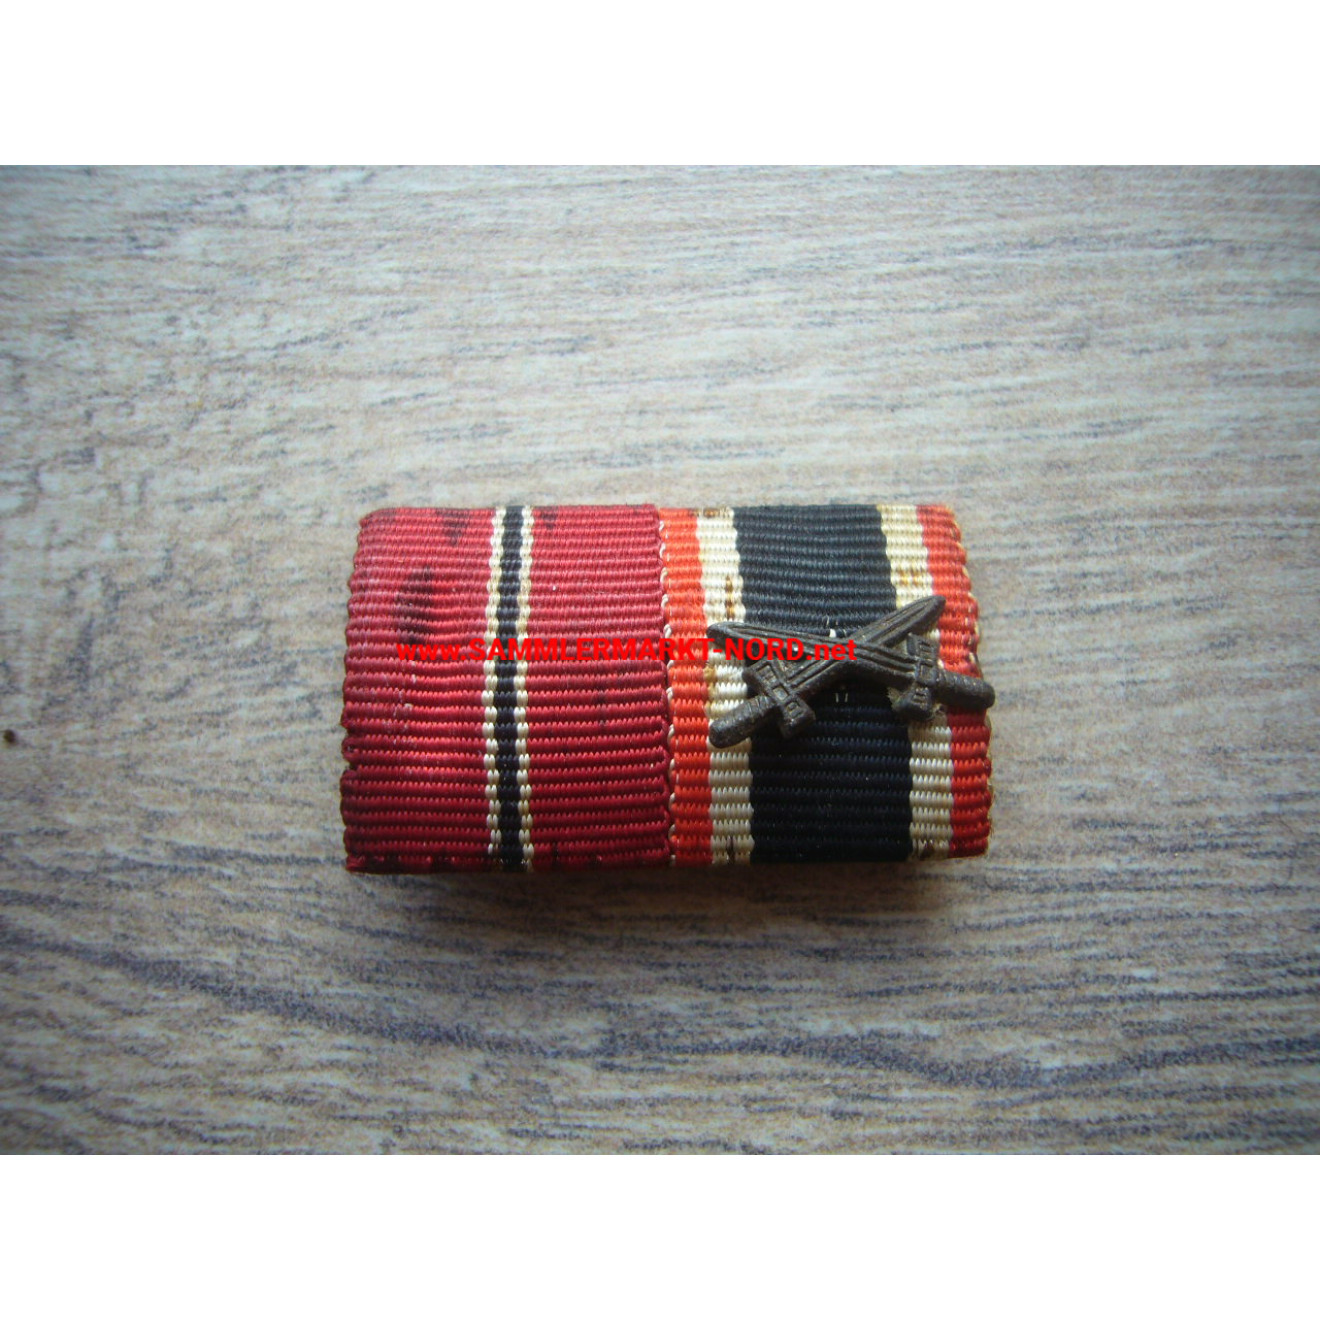 Ribbon Clasp - East Medal 1941/42 & War Merit Cross 2nd Class with Swords